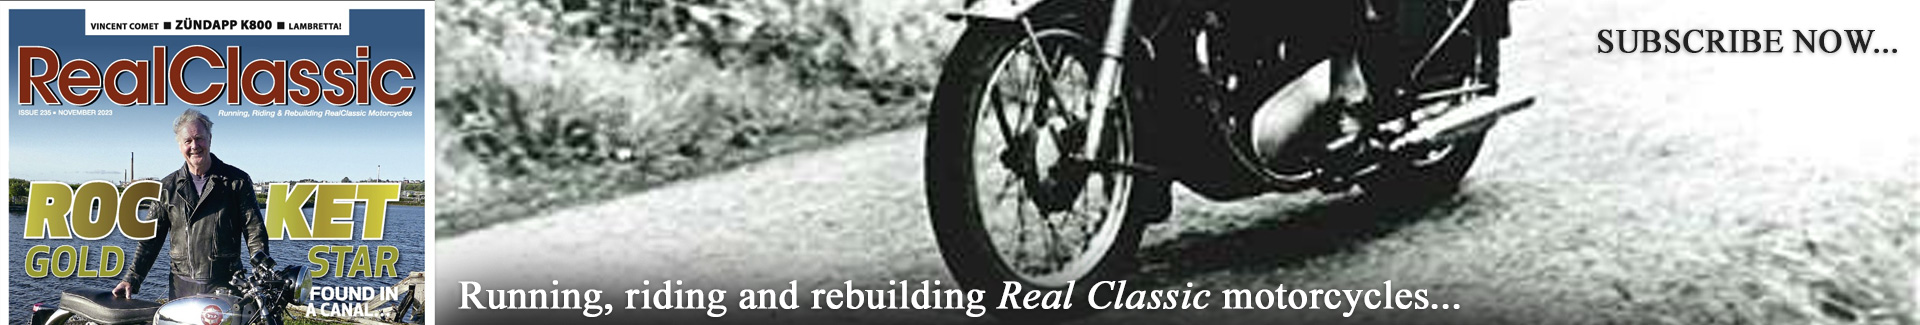 Subscribe to RealClassic Magazine